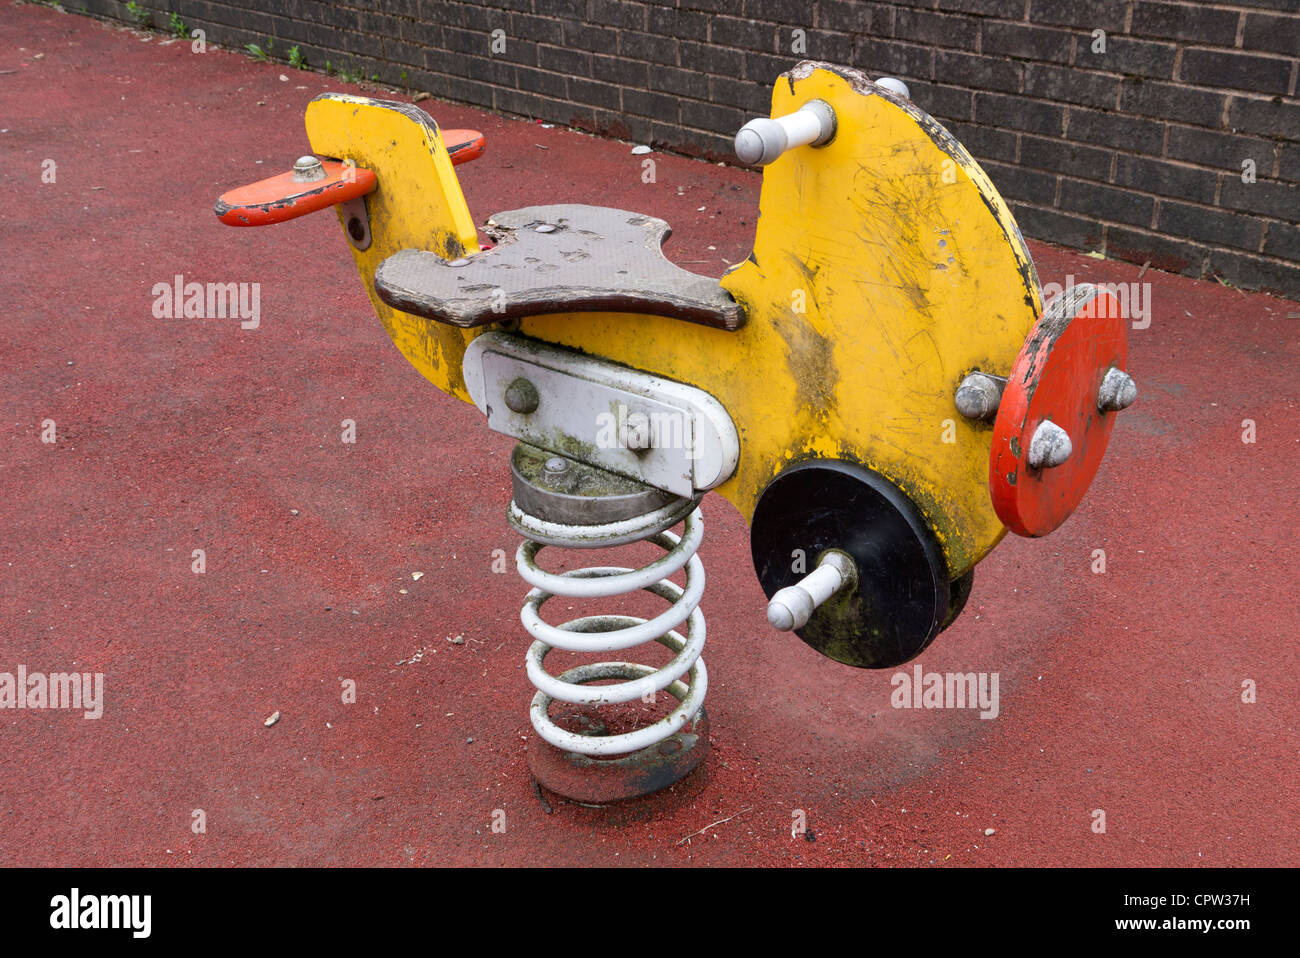 Children's play area bouncy spring plane.  Old worn and weathered. Stock Photo